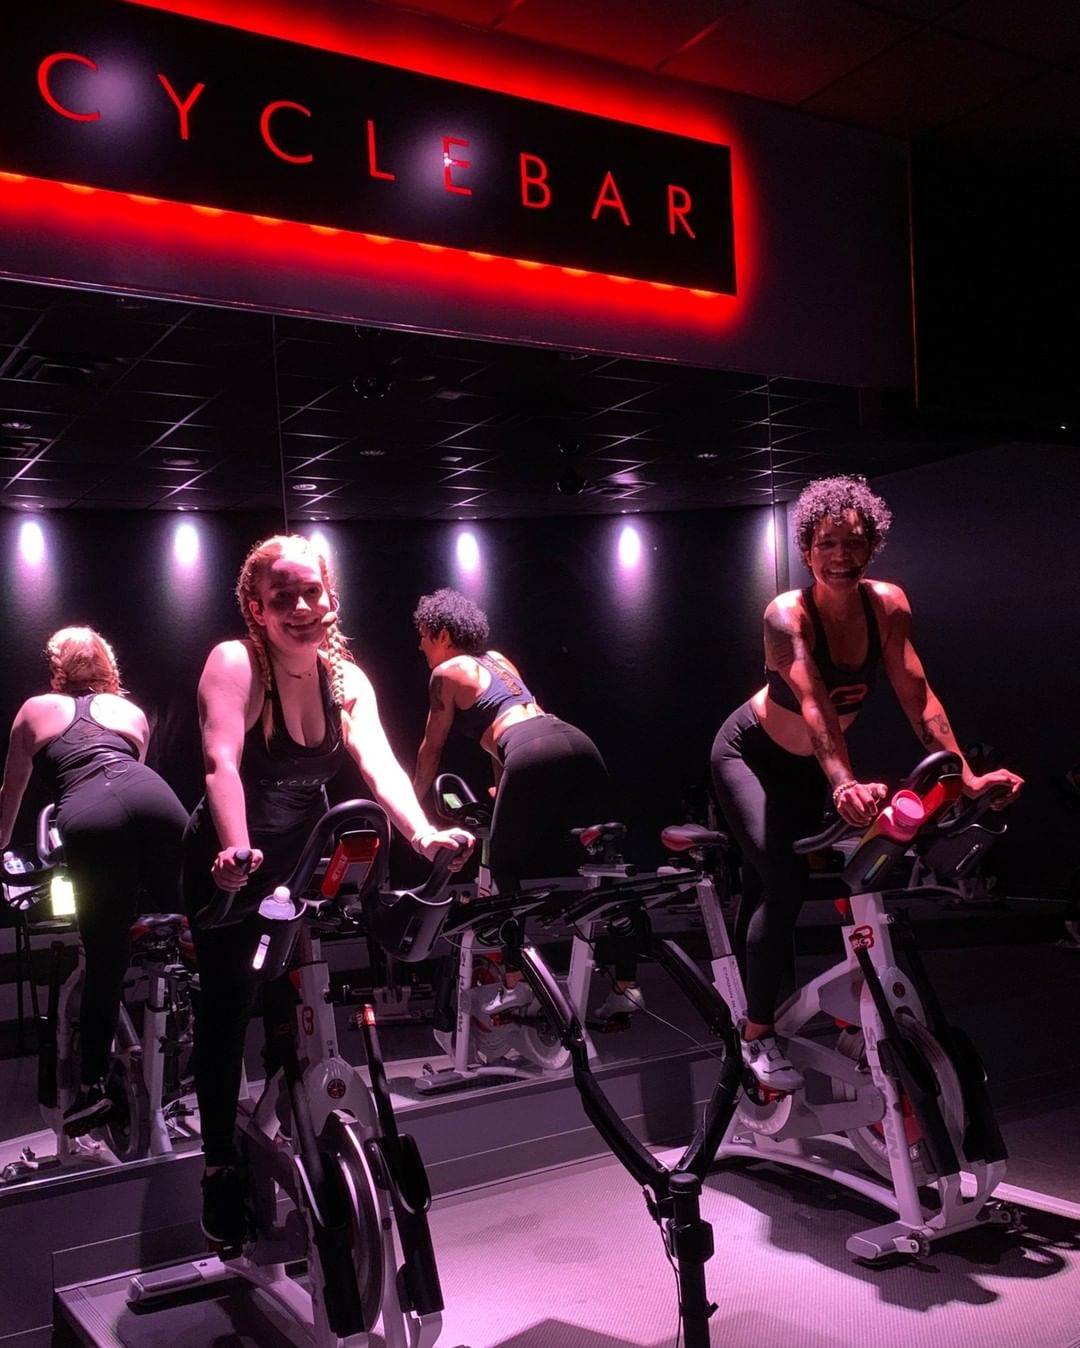 CycleBar Among First to Install Innovative Air Purifier to Address COVID-19